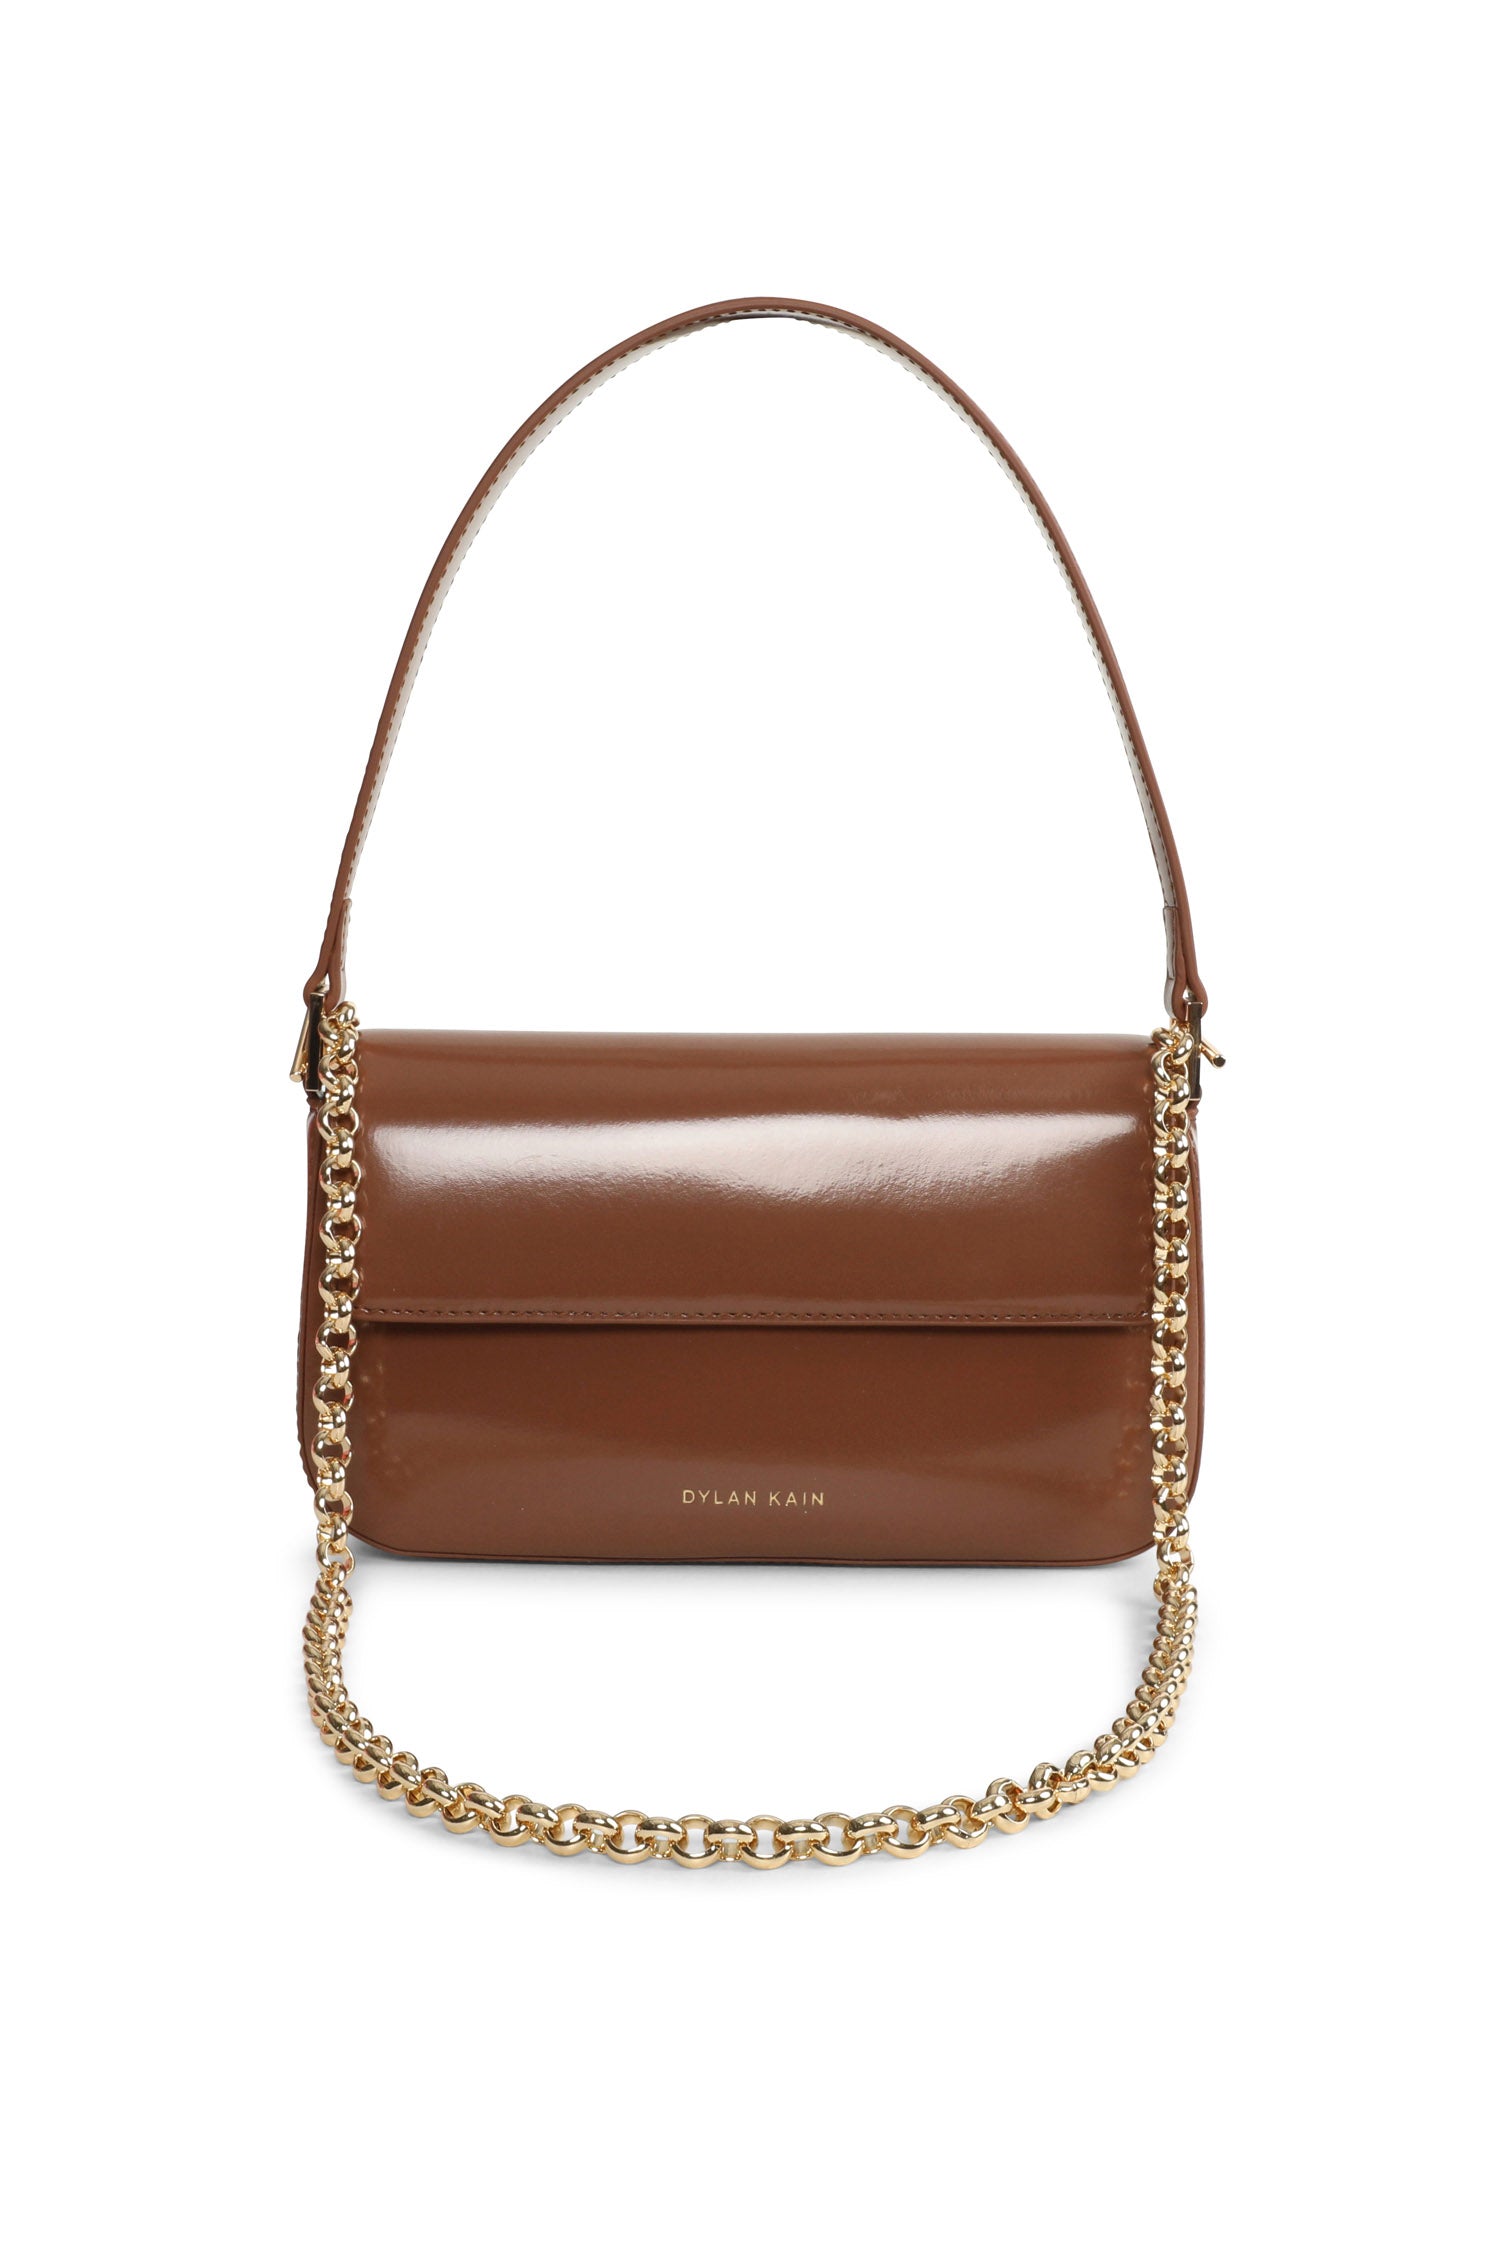 The Baguette Patent Bag Chocolate